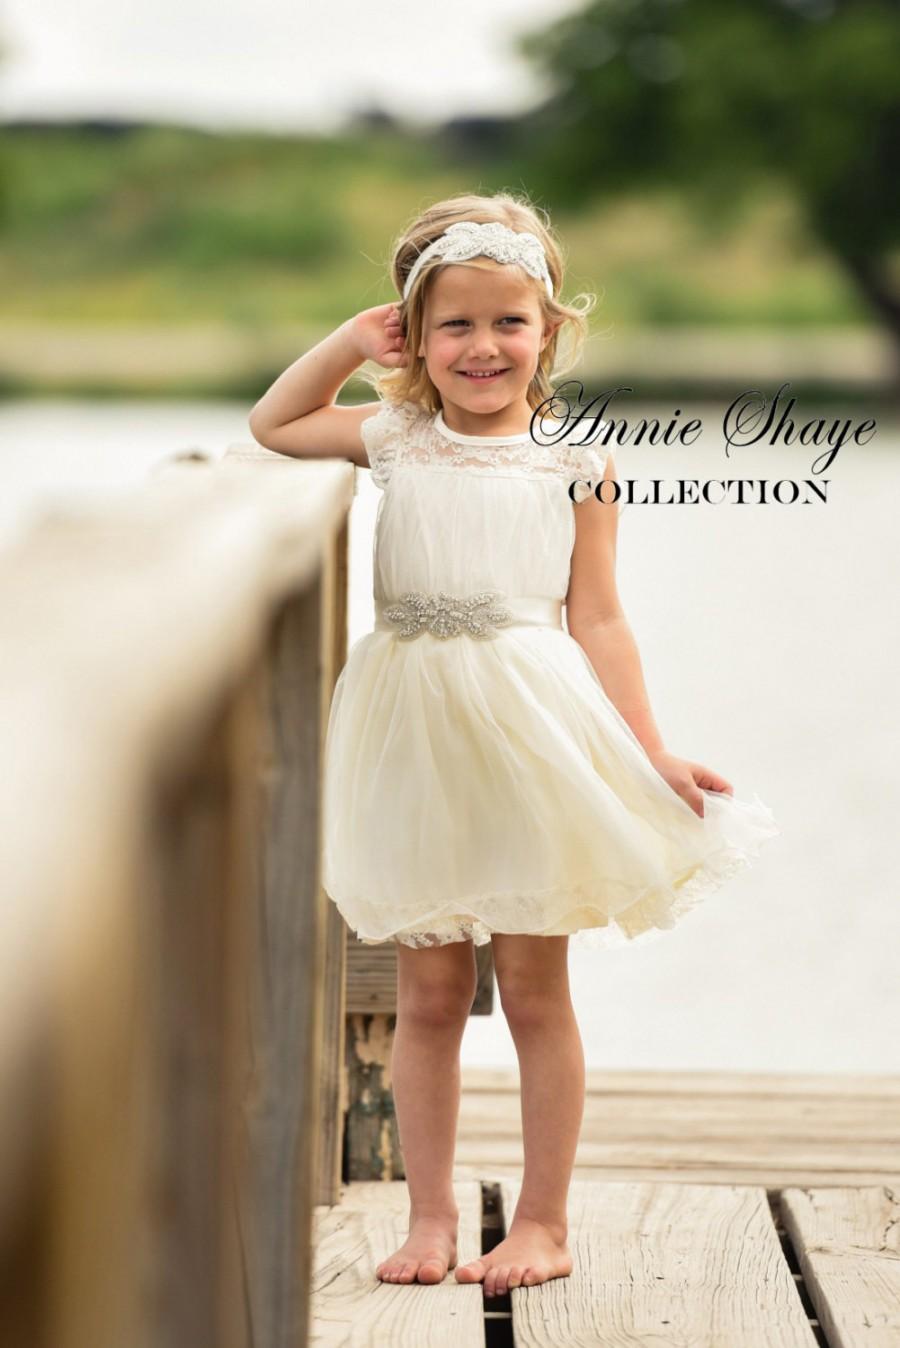 Wedding - Olivia Dress by Annie Shaye - flower girl dress ivory, lace toddler dress made for girls ages 9-12M,1t,2t,3t,4t,5,6,7,8, 9,10,11,12,13,14